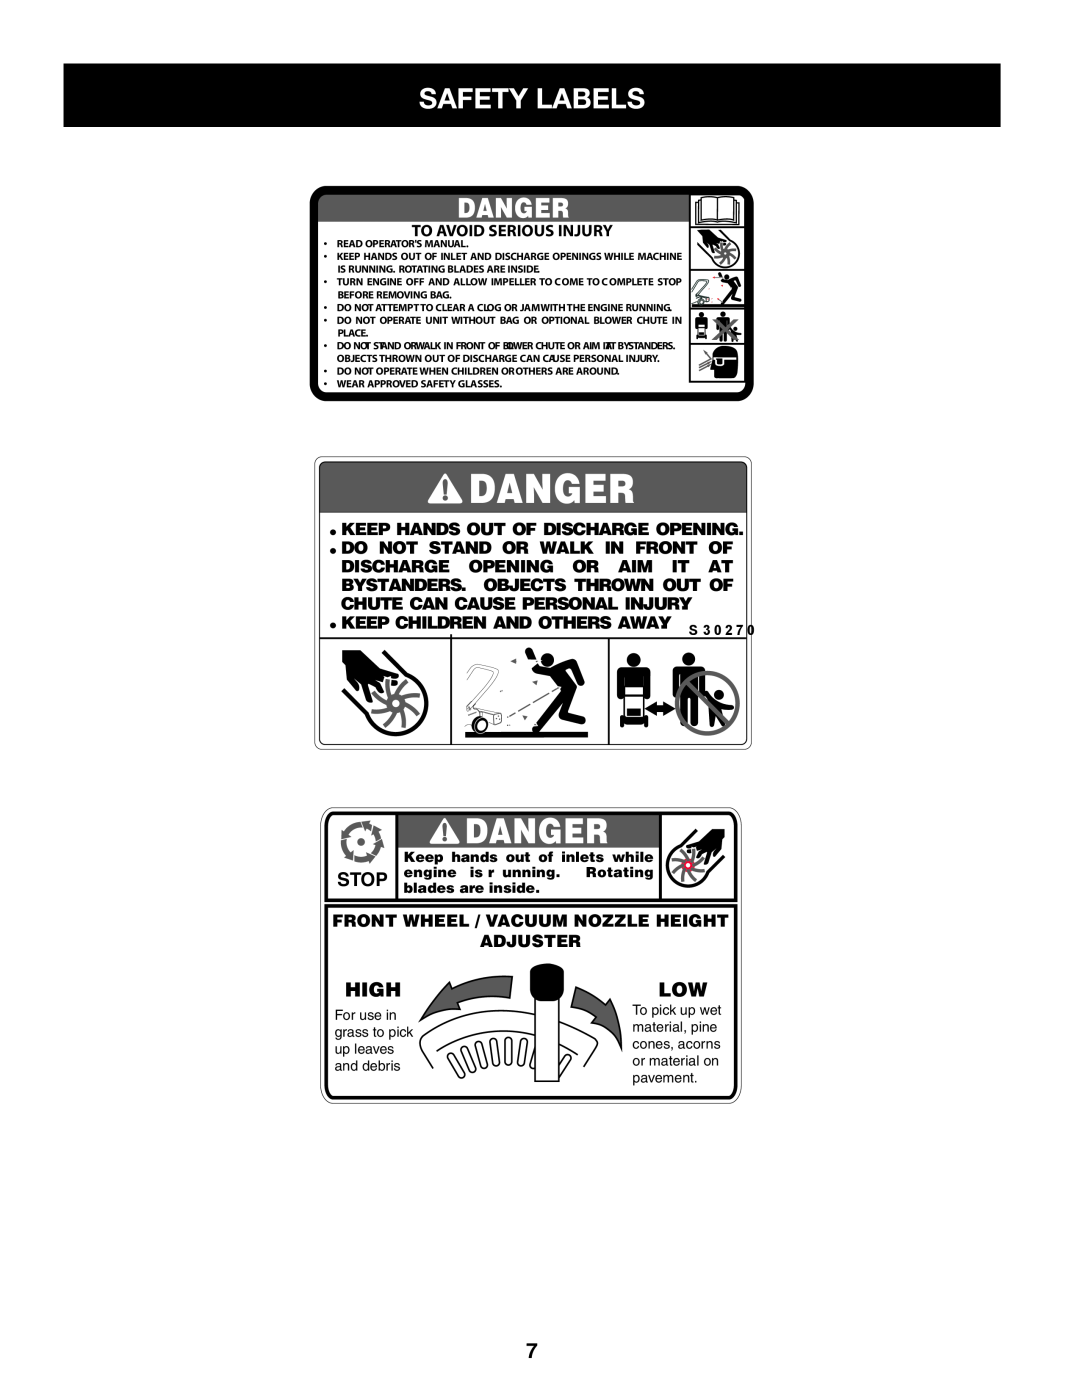 Craftsman 247.77013.0 Safety Labels, Danger, High, Stop, To Avoid Serious Injury, Keep Hands Out Of Discharge Opening 